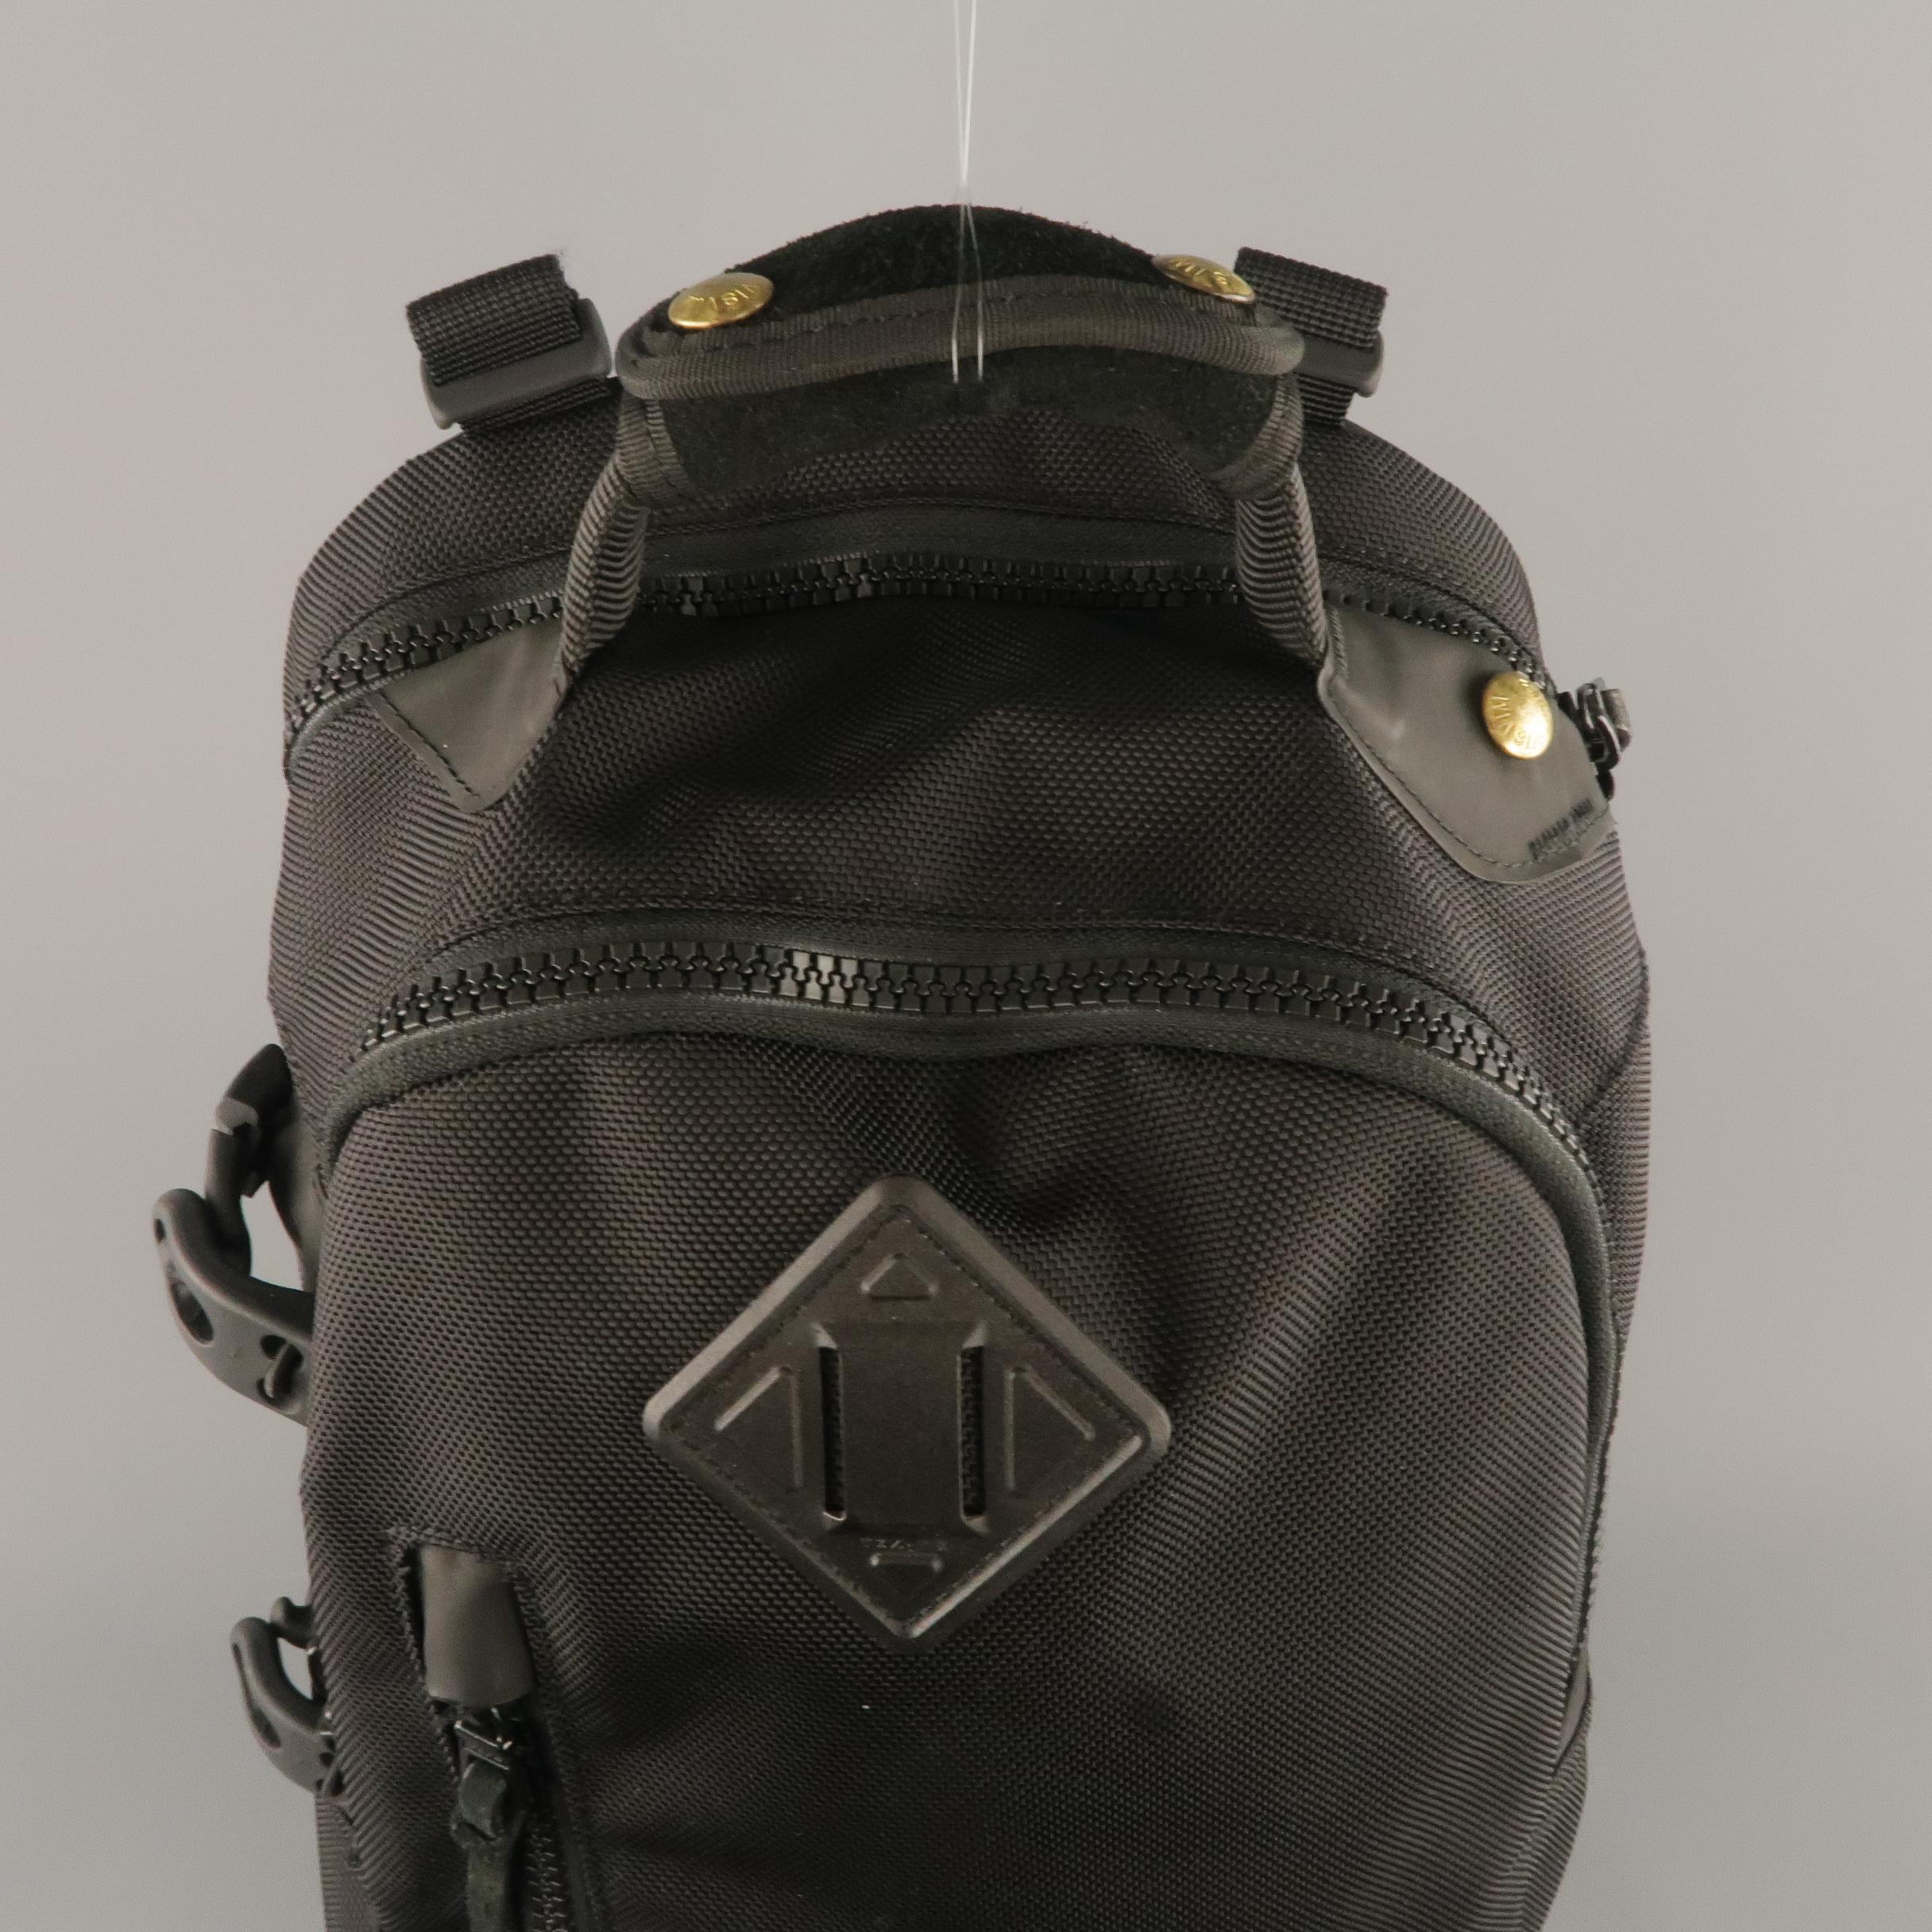 VISVIM Ballistic 20 Liter backpack comes in nylon textured canvas with a distressed suede bottom, multiple zip compartments, padded back, and adjustable straps. With tags.
 
Excellent Pre-Owned Condition.
 
Measurements:
 
Length: 12.5 in.
Width: 9